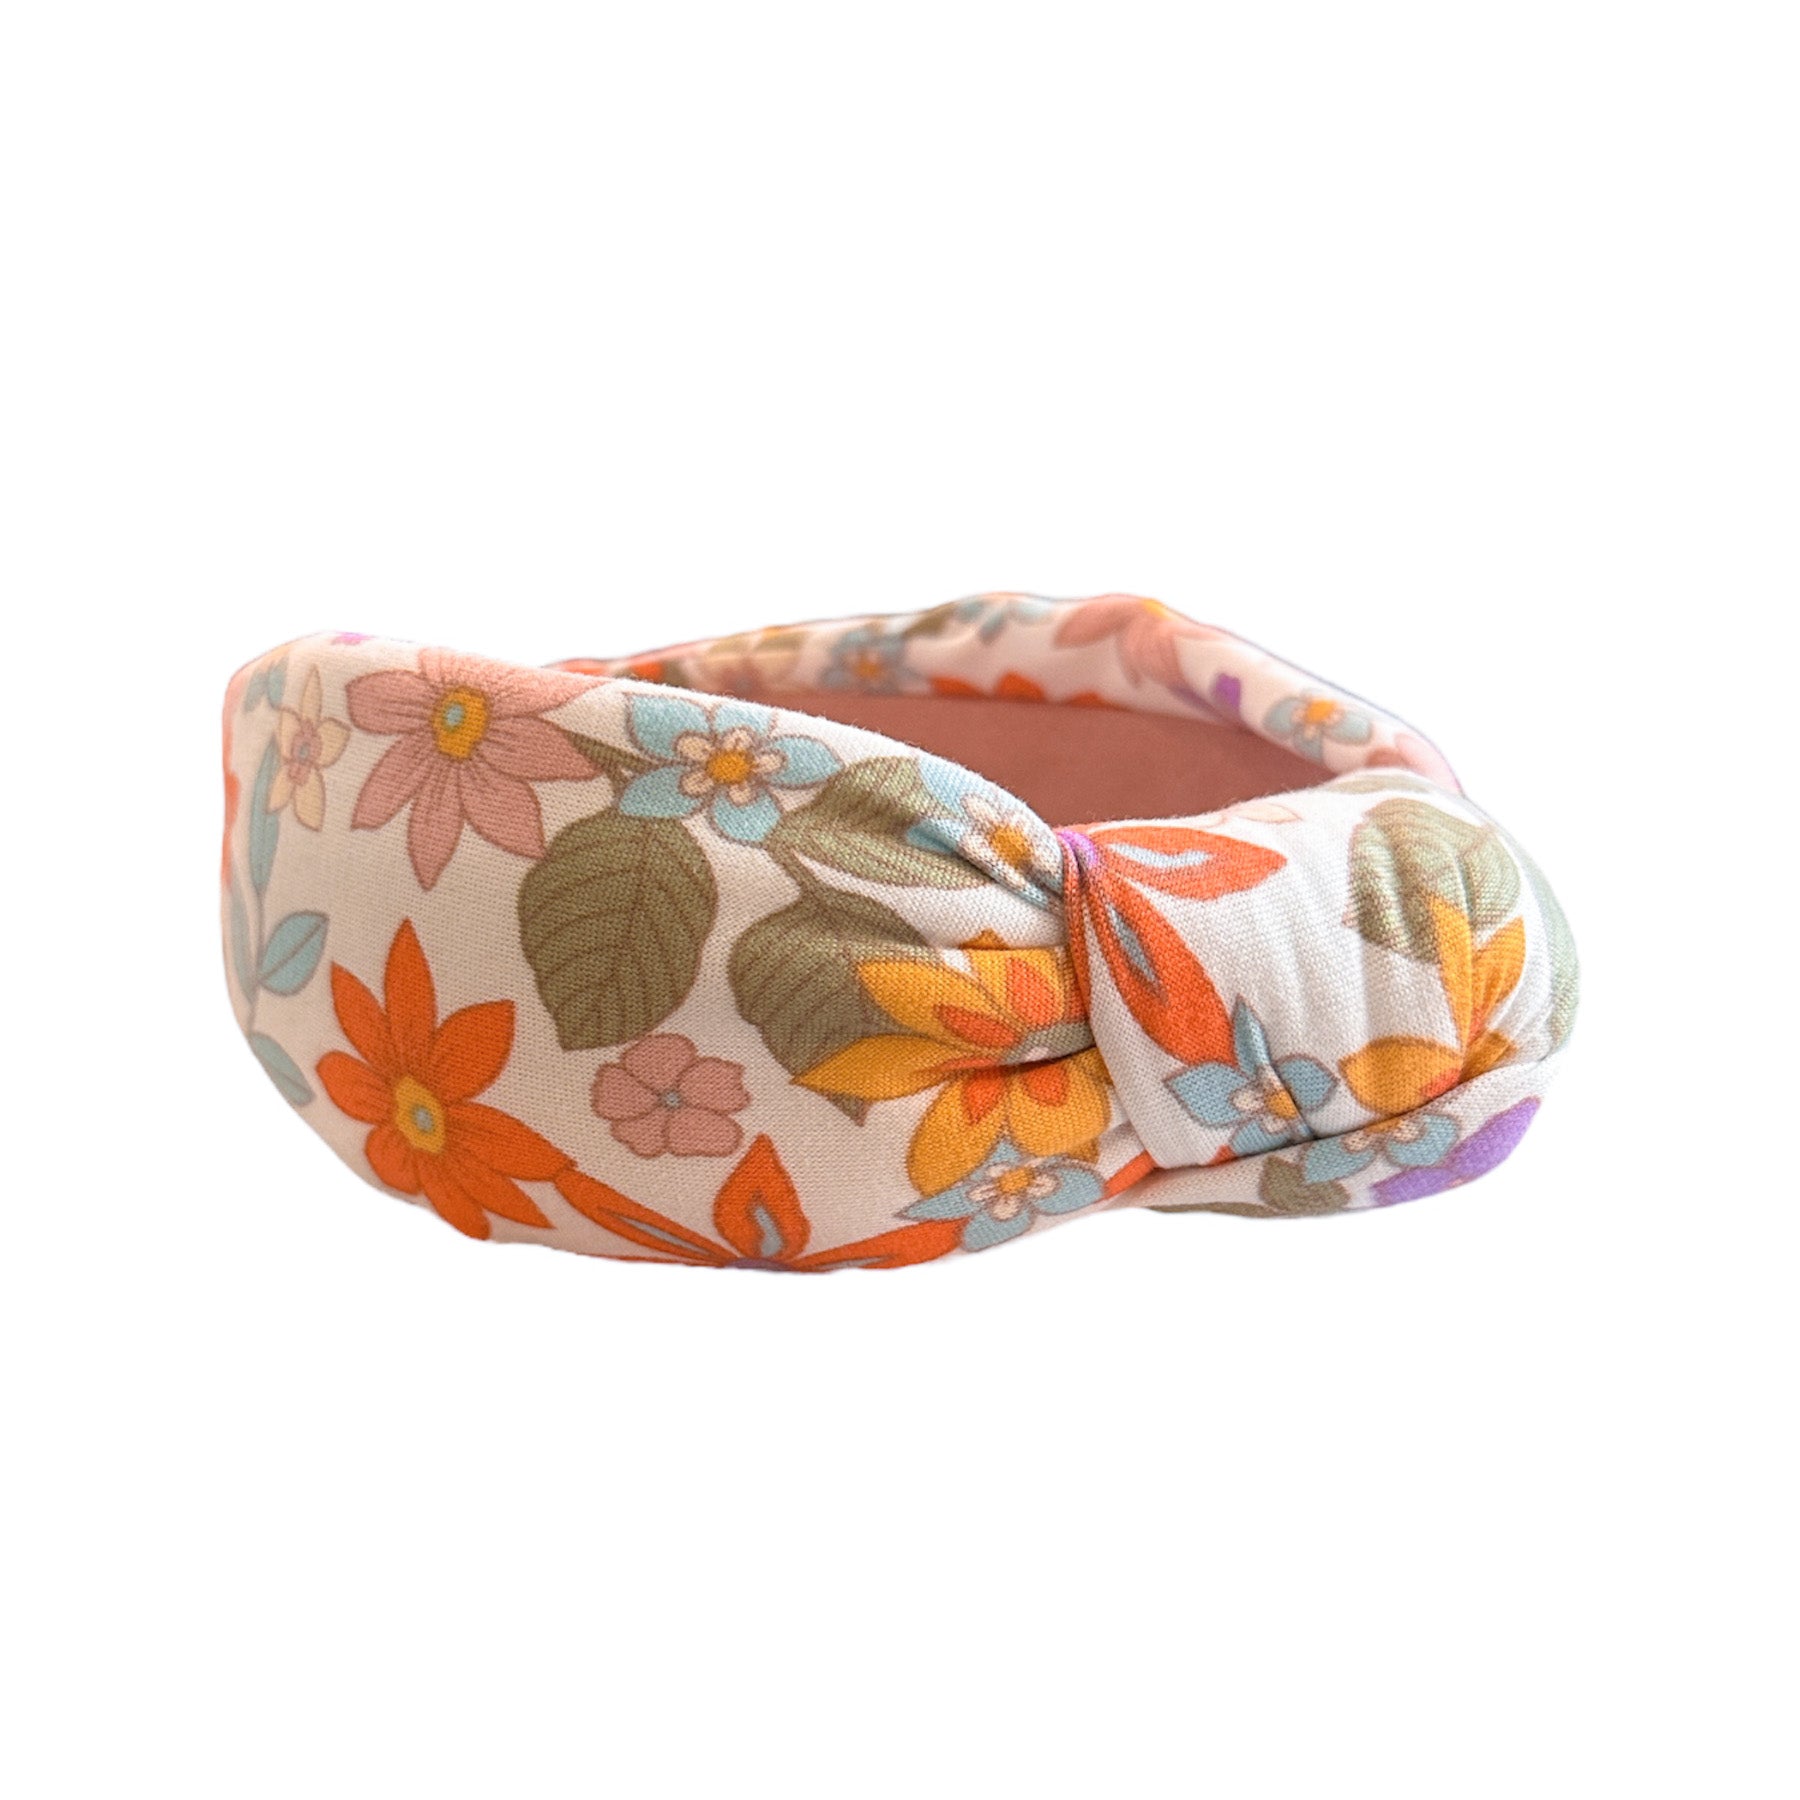 Retro Floral Knotted Headband